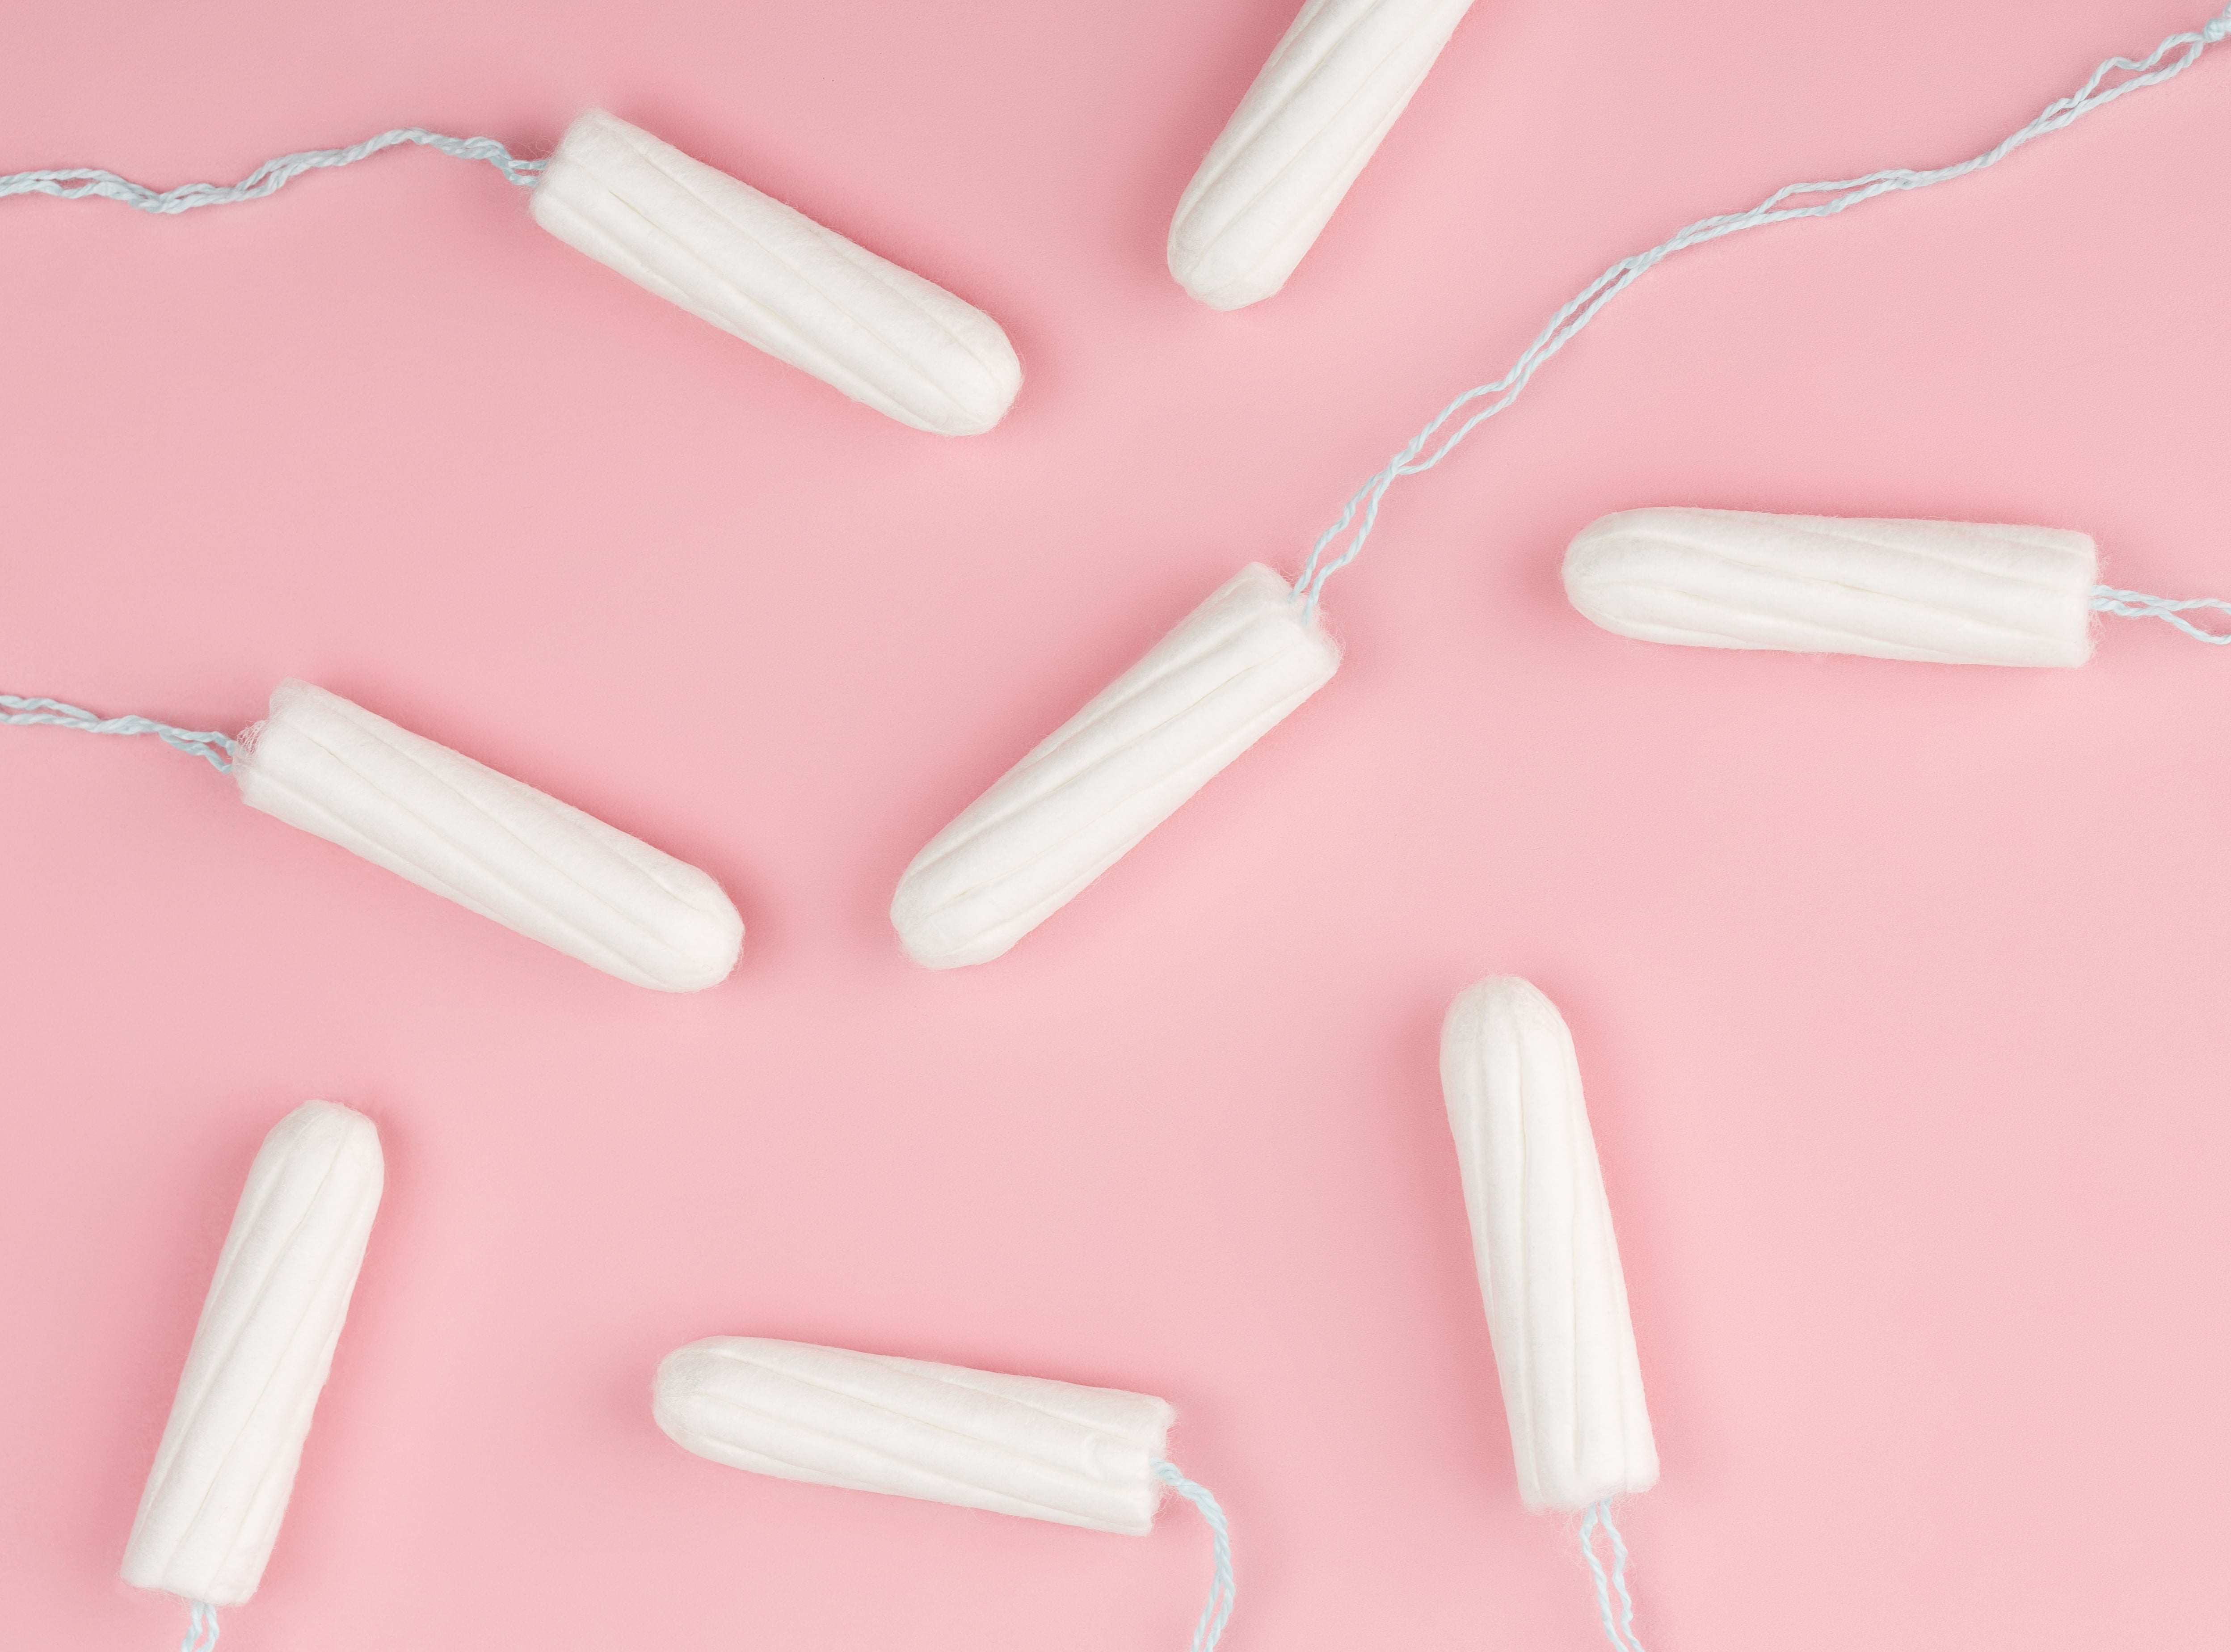 Which are the Best Tampons for Periods and Why?